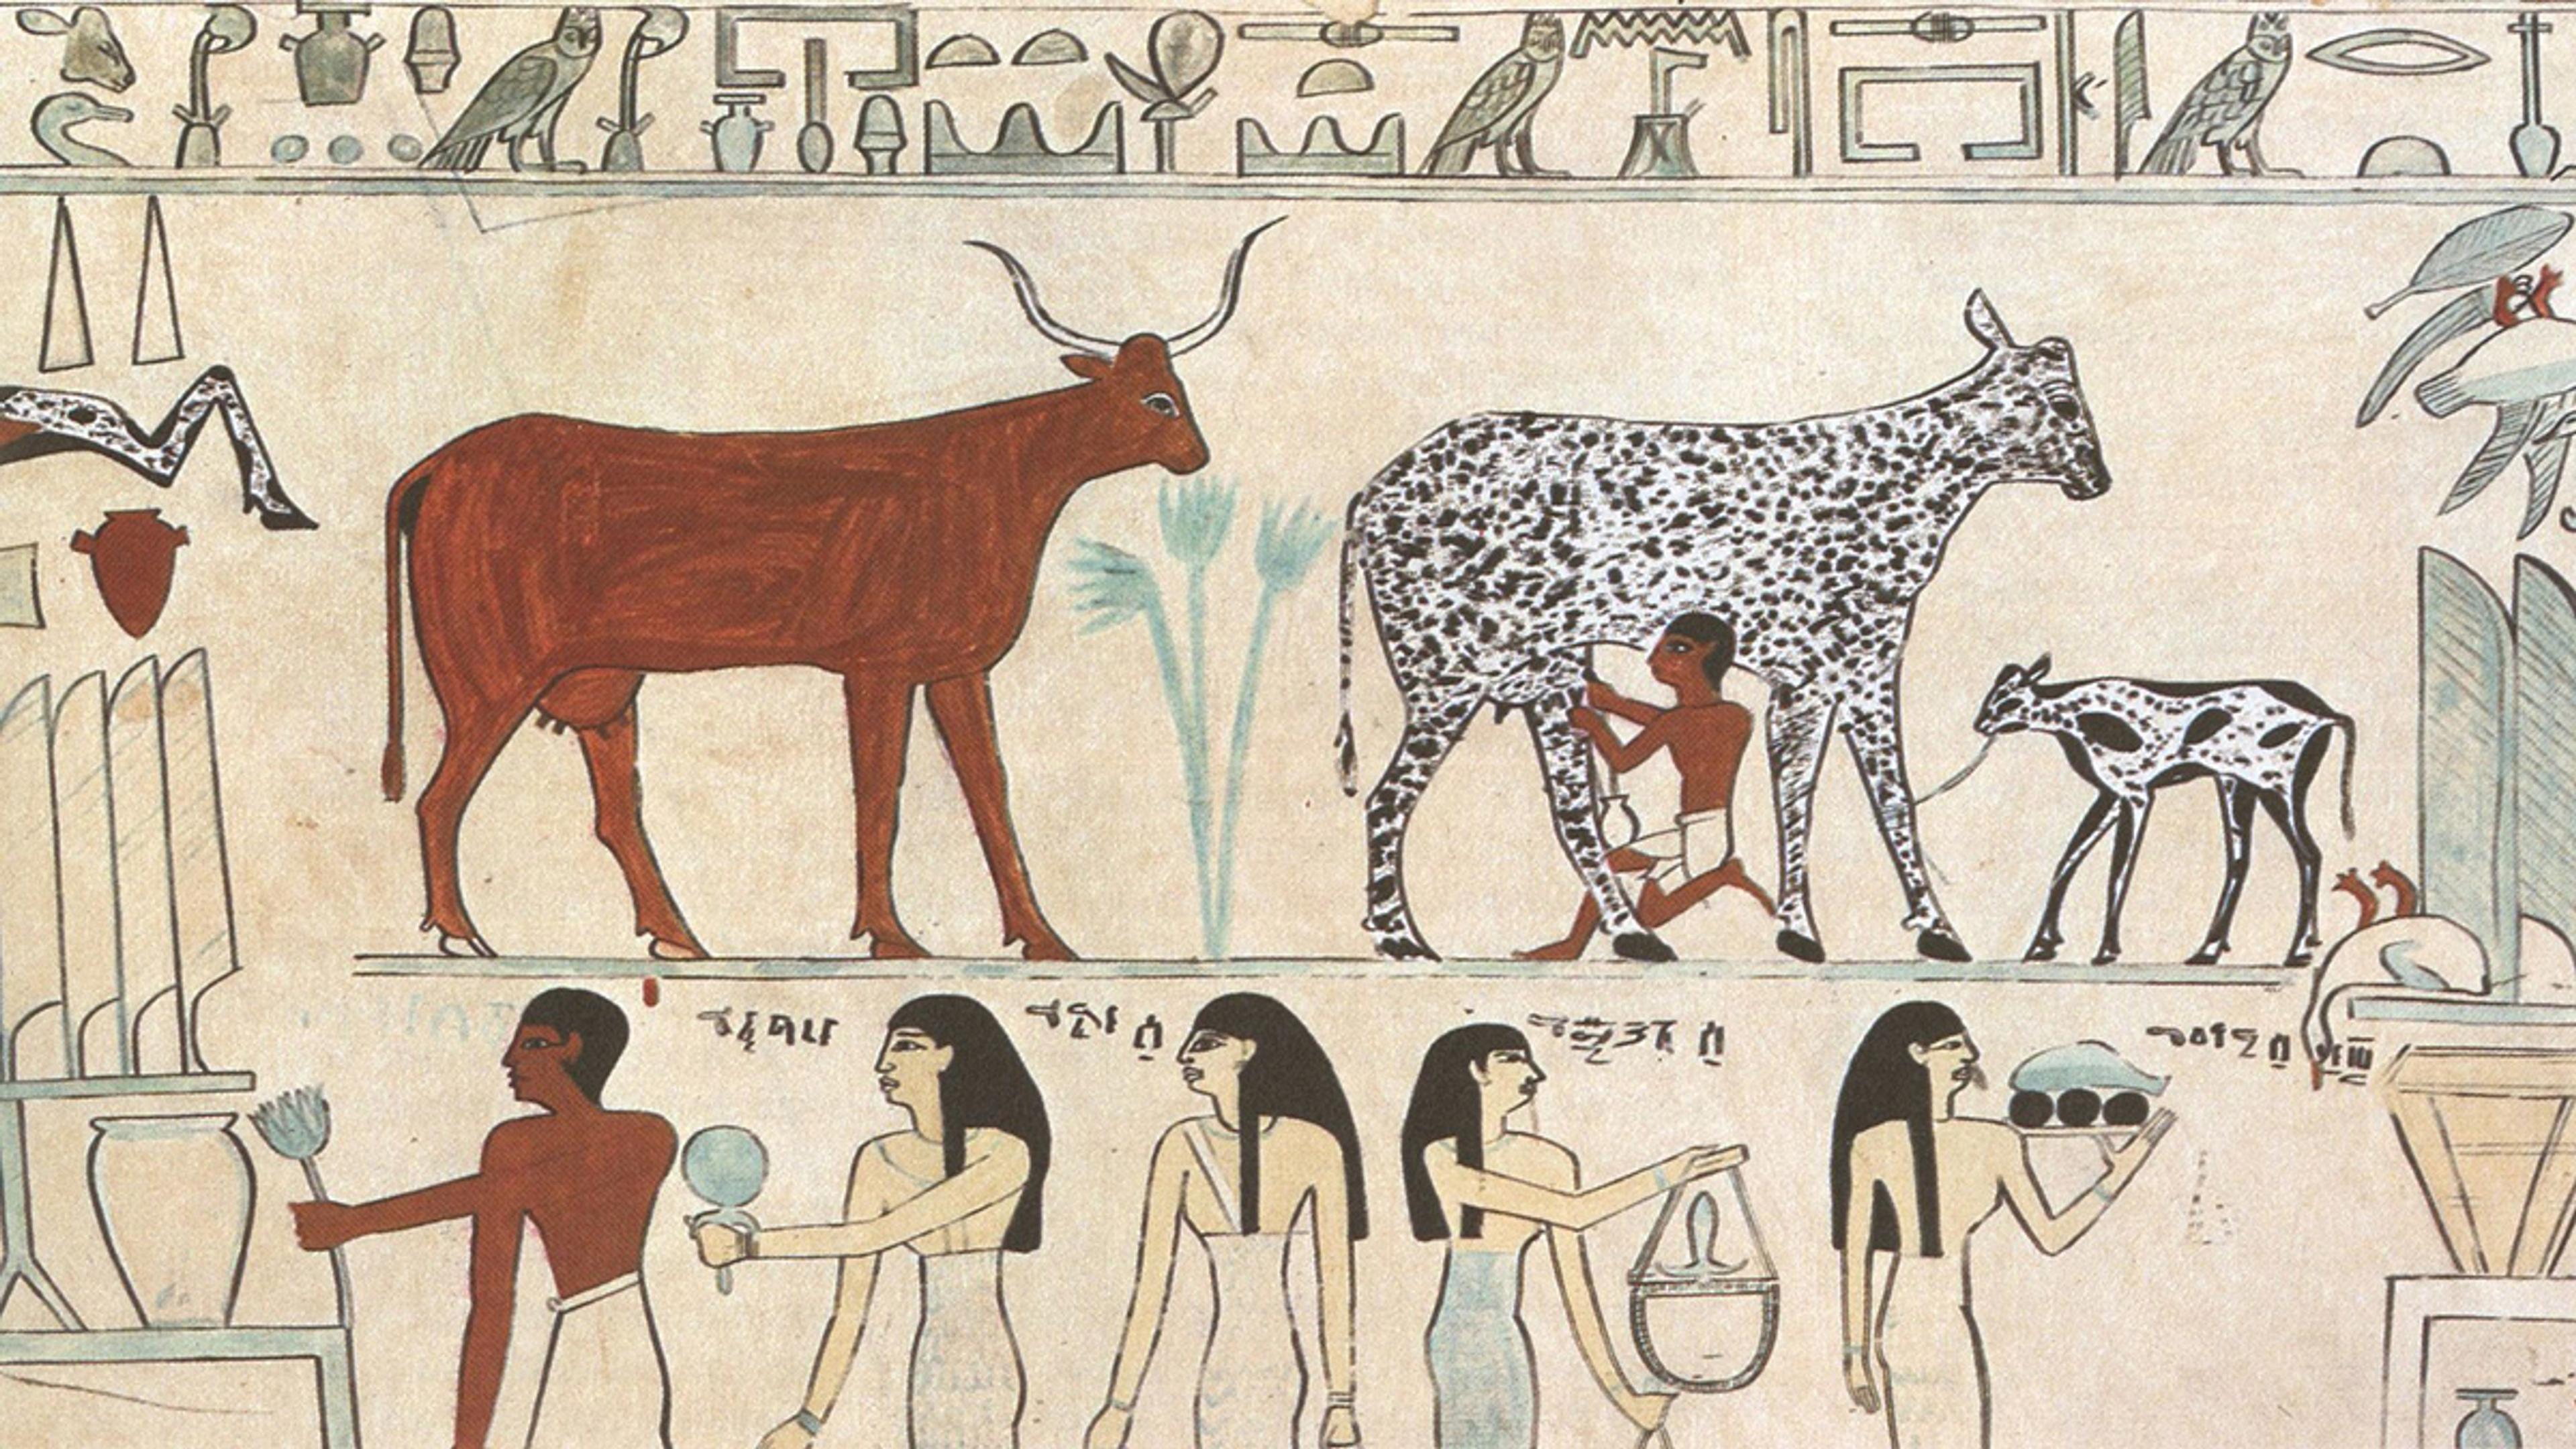 An image of Egyptian hieroglyphics showing a person milking a black and white spotted cow.